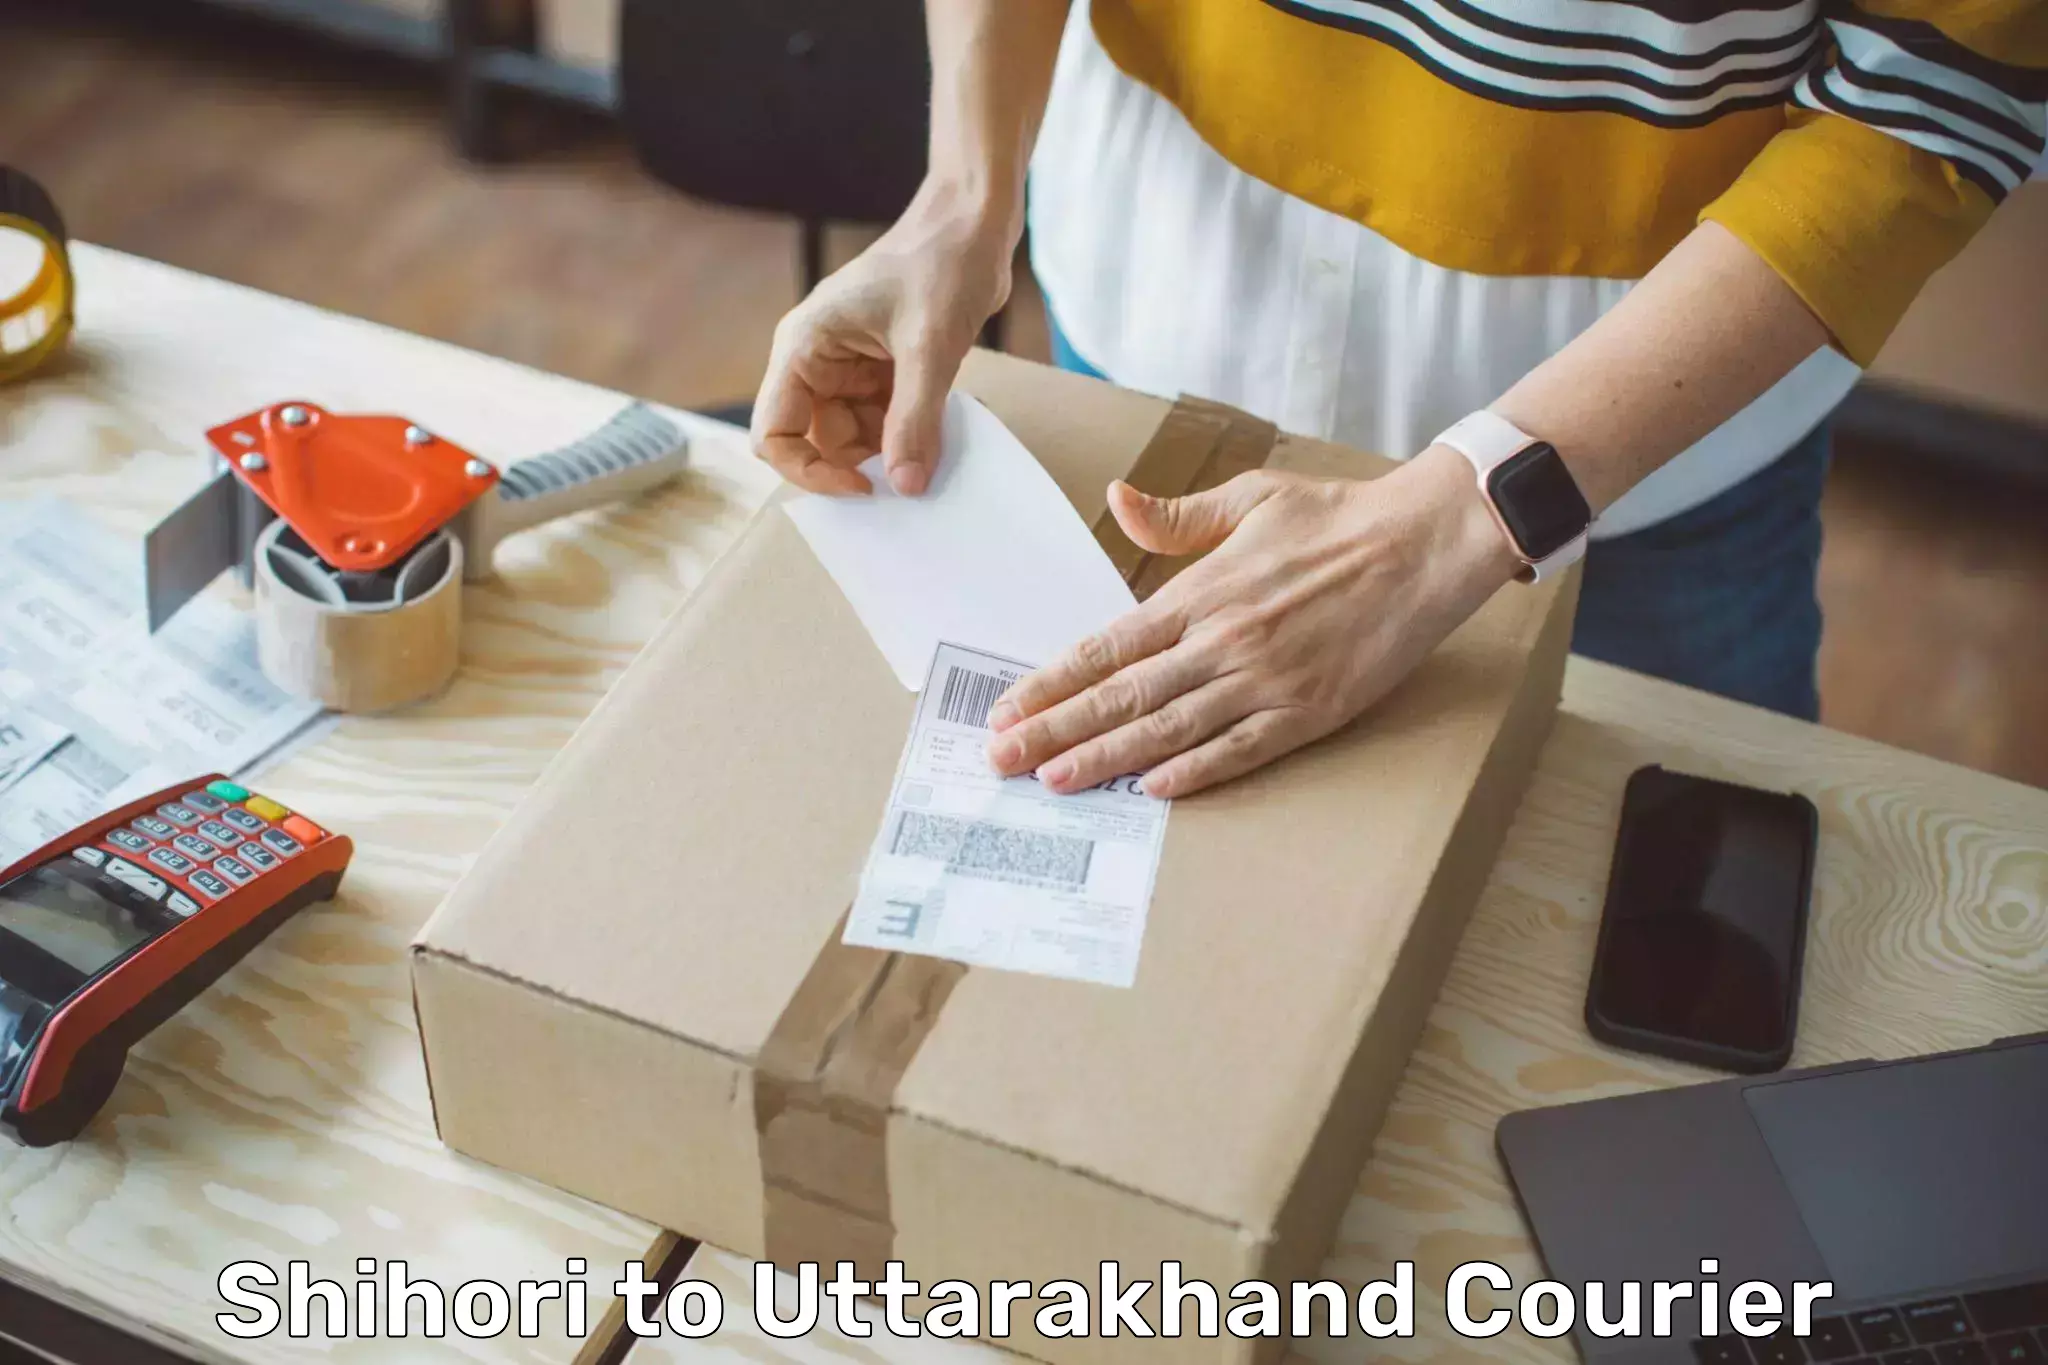 Medical delivery services Shihori to Uttarakhand